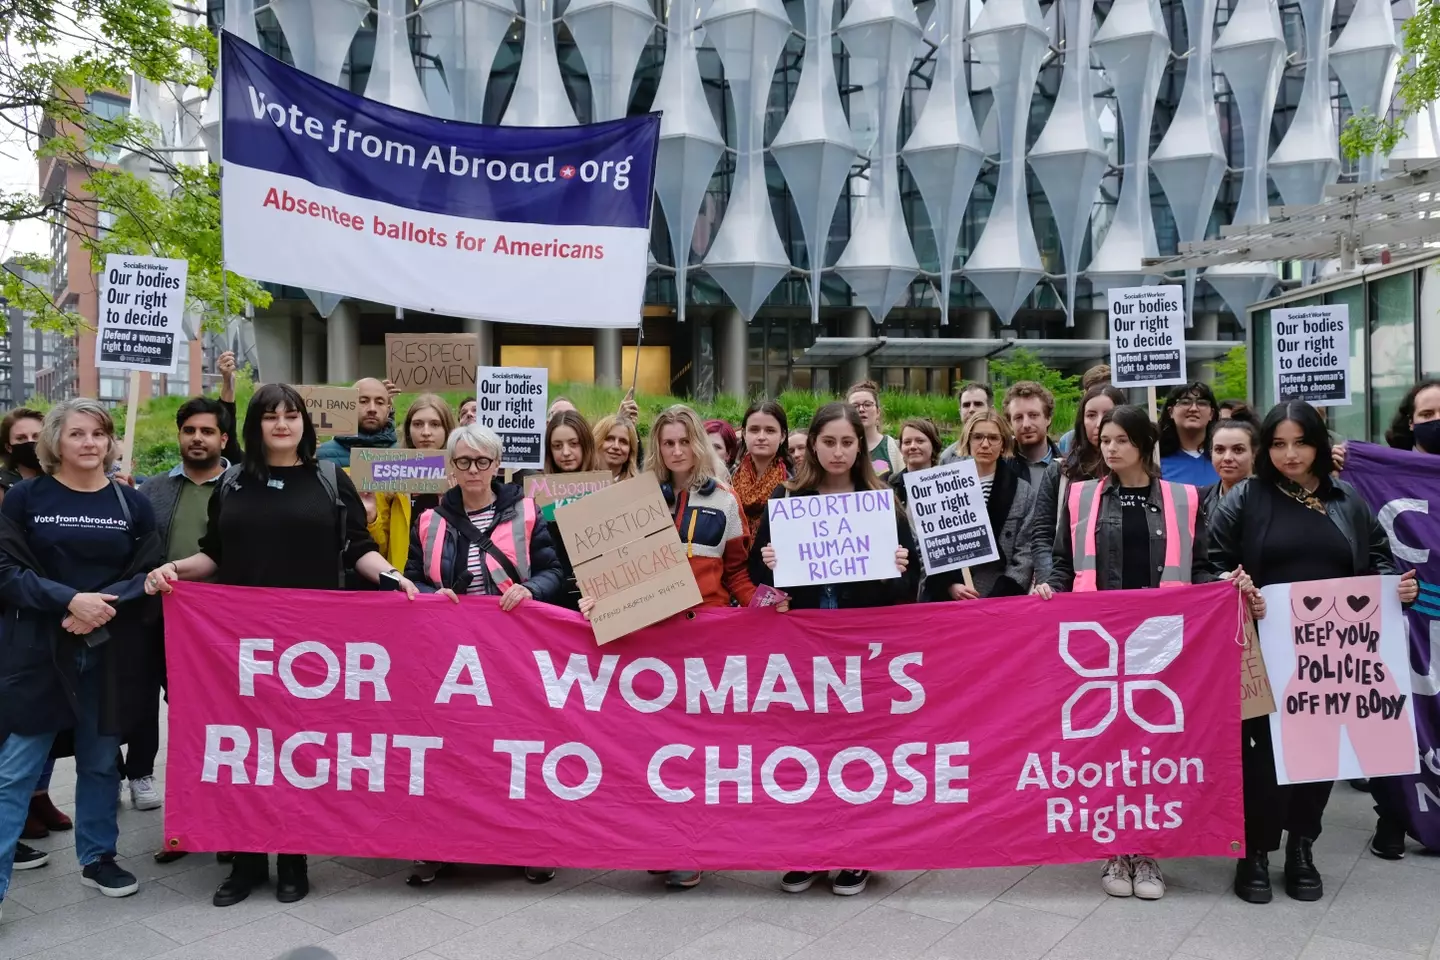 Demonstrations have been held around the world against the decision to overturn Roe v Wade.